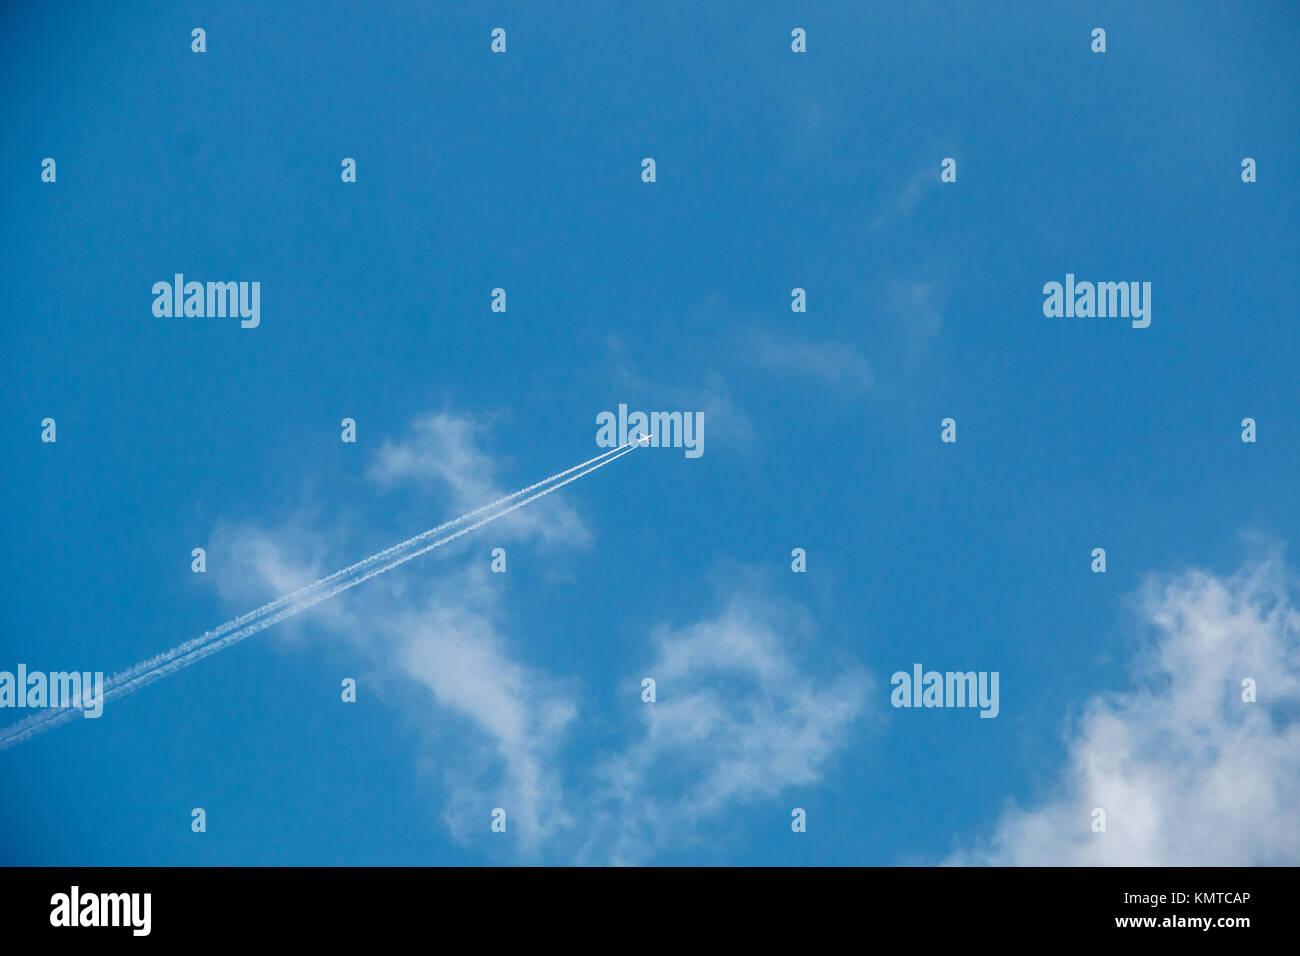 A plane far away in the sky with contrails and clouds Stock Photo